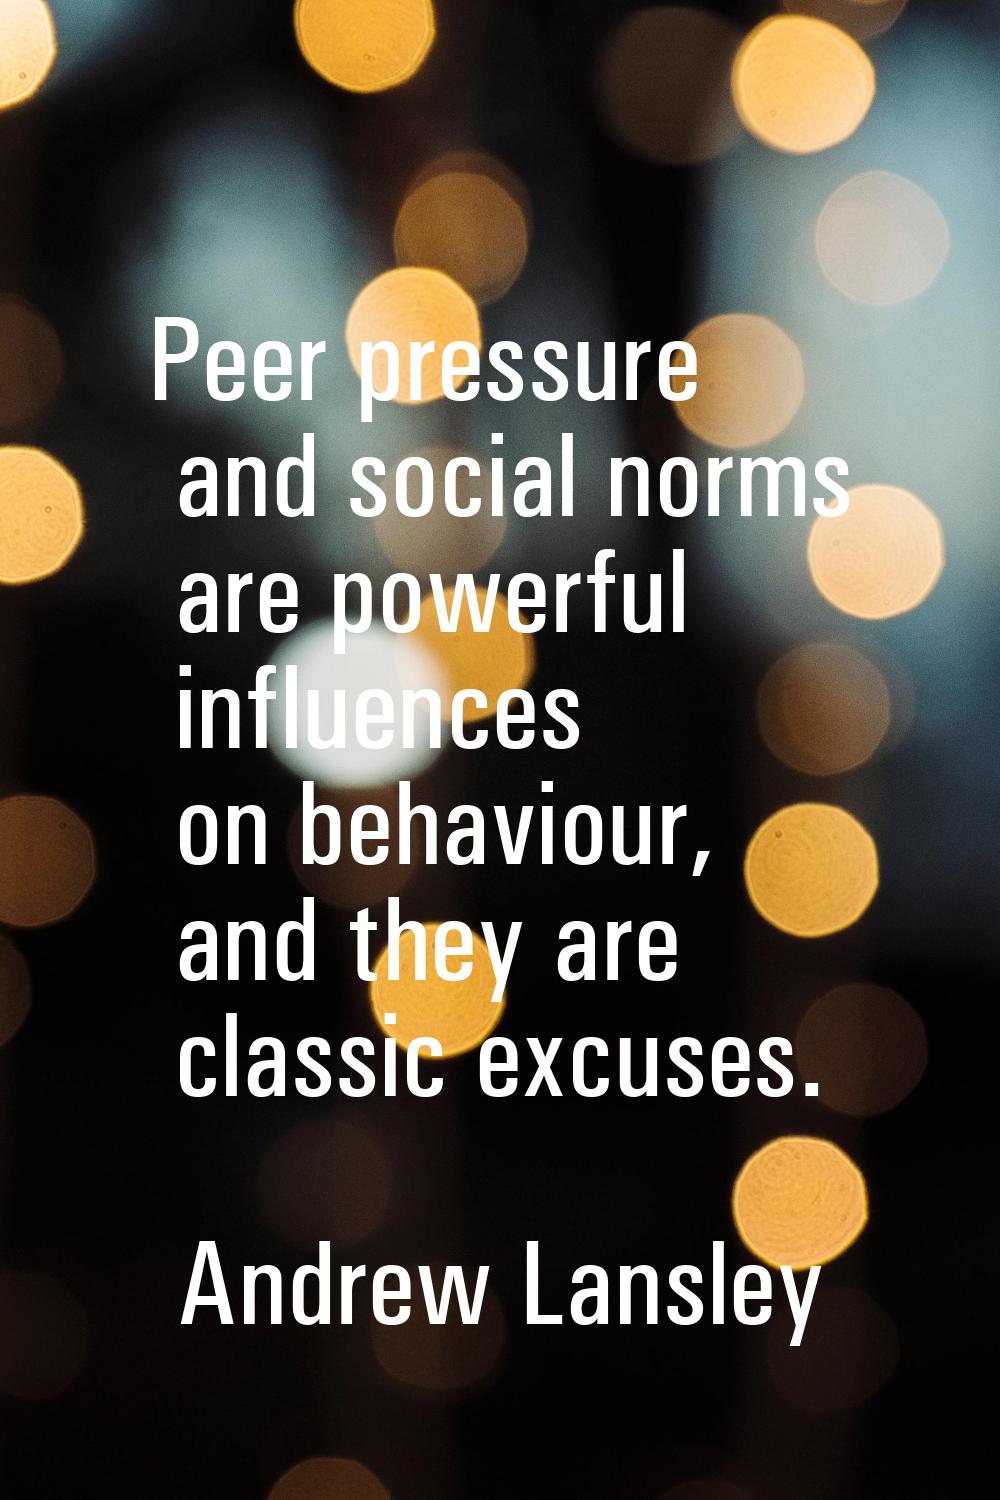 Peer pressure and social norms are powerful influences on behaviour, and they are classic excuses.